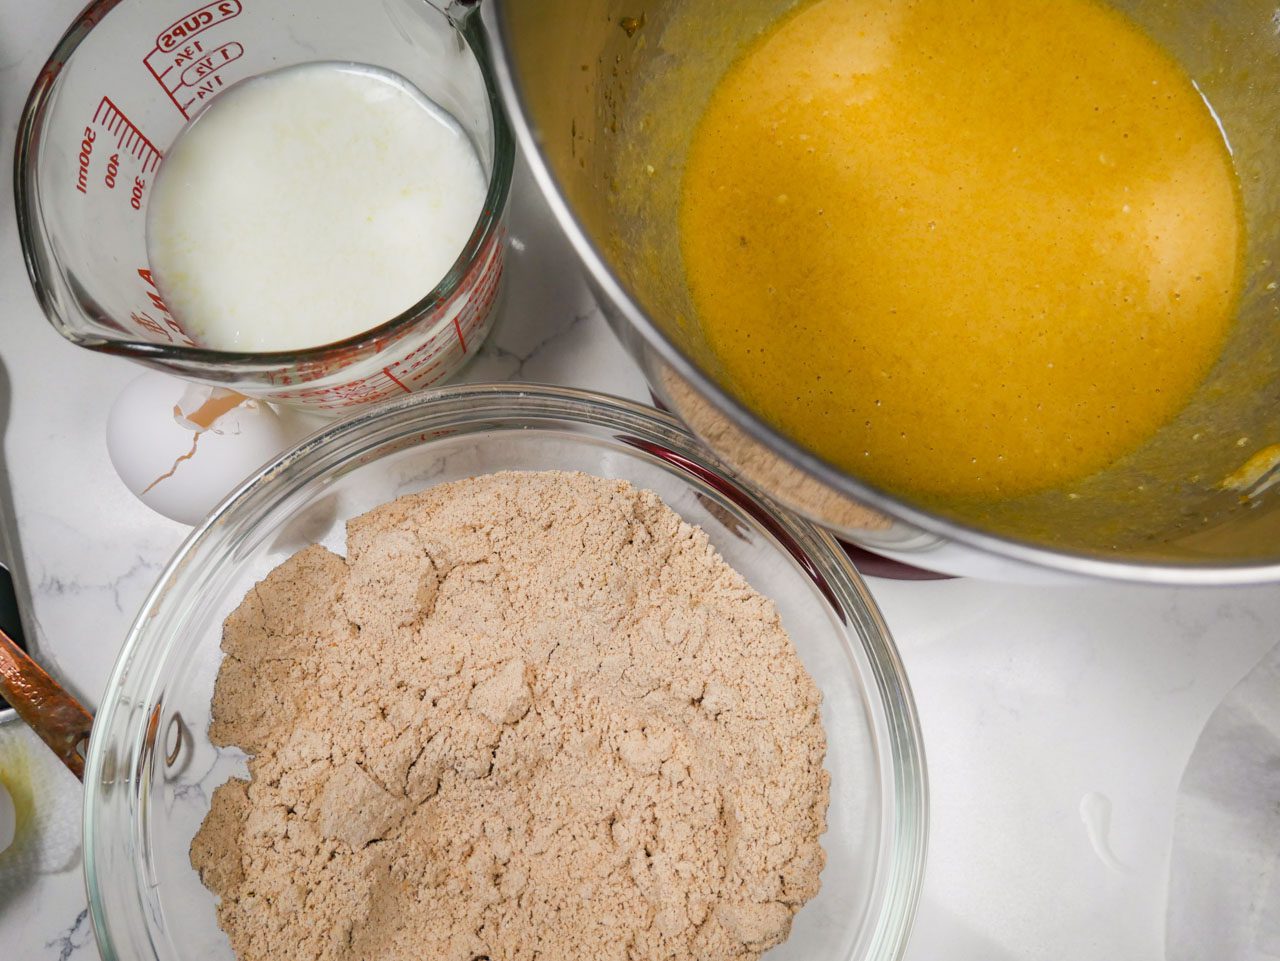 Dry and wet ingredients for gingerbread